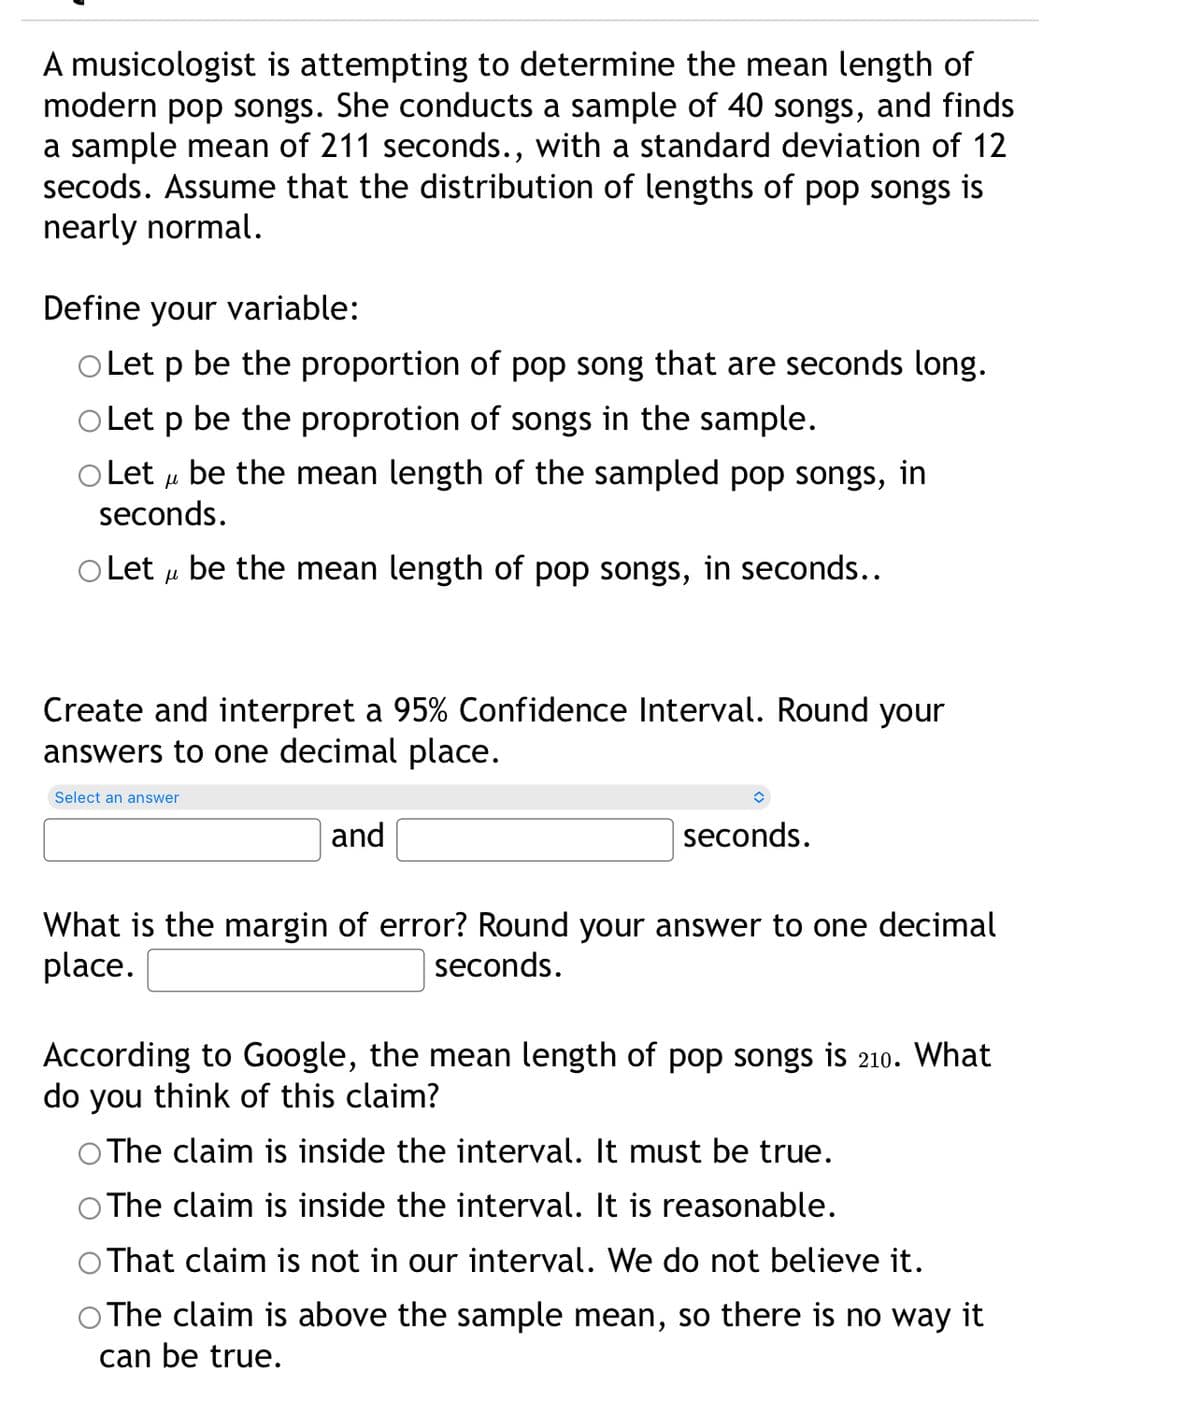 A musicologist is attempting to determine the mean length of
modern pop songs. She conducts a sample of 40 songs, and finds
a sample mean of 211 seconds., with a standard deviation of 12
secods. Assume that the distribution of lengths of pop songs is
nearly normal.
Define your variable:
O Let p be the proportion of pop song that are seconds long.
Let p be the proprotion of songs in the sample.
O Let u be the mean length of the sampled pop songs, in
seconds.
O Let u be the mean length of pop songs, in seconds...
Create and interpret a 95% Confidence Interval. Round your
answers to one decimal place.
Select an answer
and
seconds.
What is the margin of error? Round your answer to one decimal
place.
seconds.
According to Google, the mean length of pop songs is 210. What
do you think of this claim?
O The claim is inside the interval. It must be true.
The claim is inside the interval. It is reasonable.
That claim is not in our interval. We do not believe it.
The claim is above the sample mean, so there is no way it
can be true.
